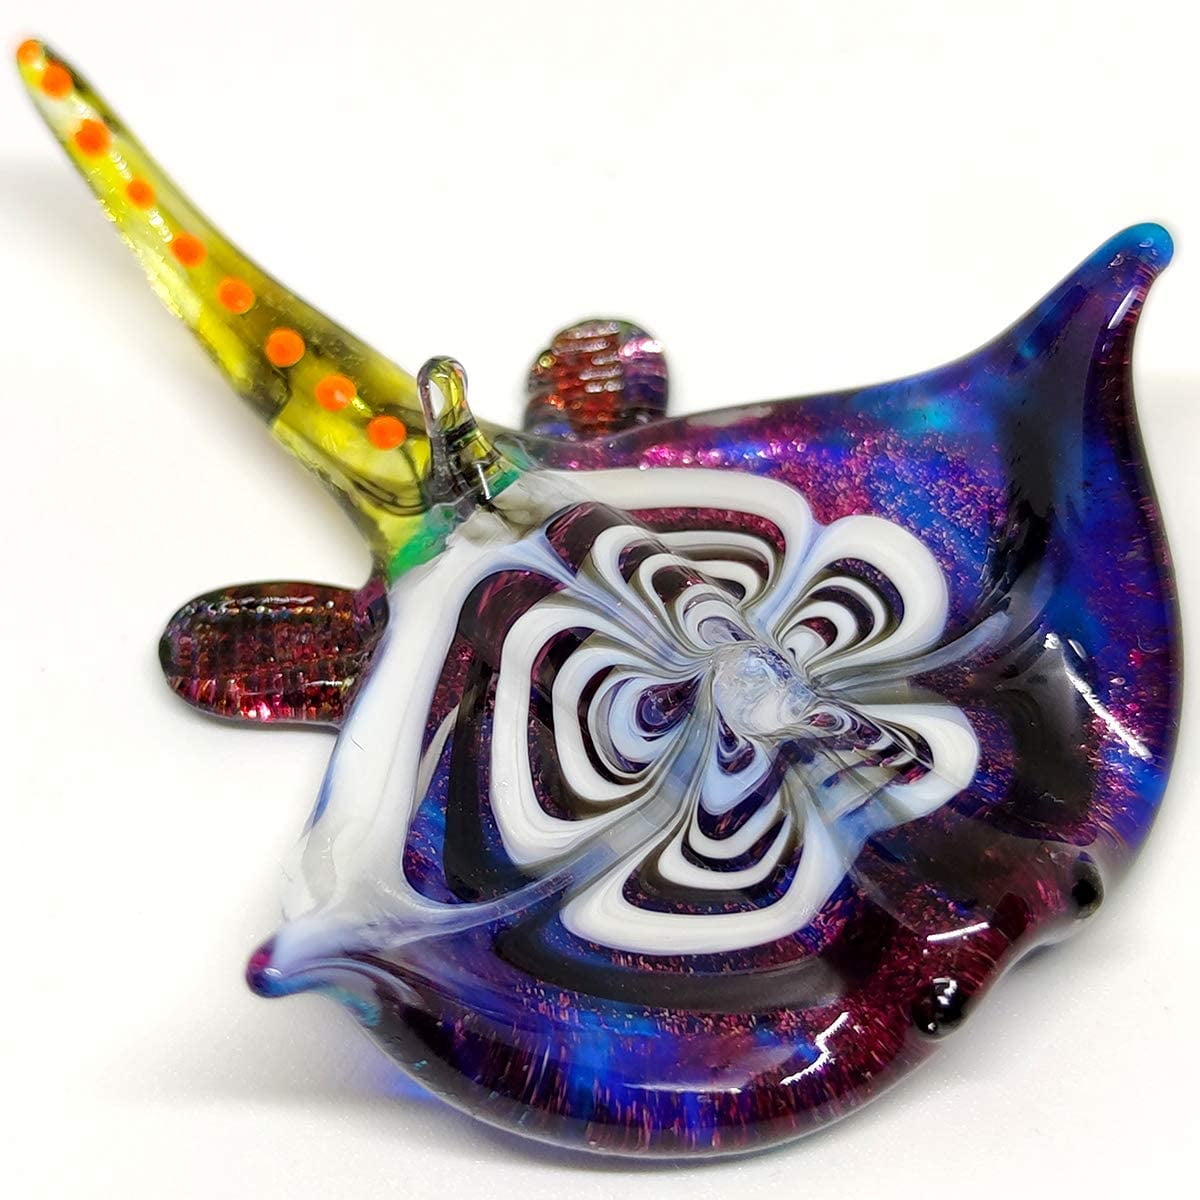 New Miniature Blown Glass Blowing Art Purple Frog Animal Decor Collectible Gift 